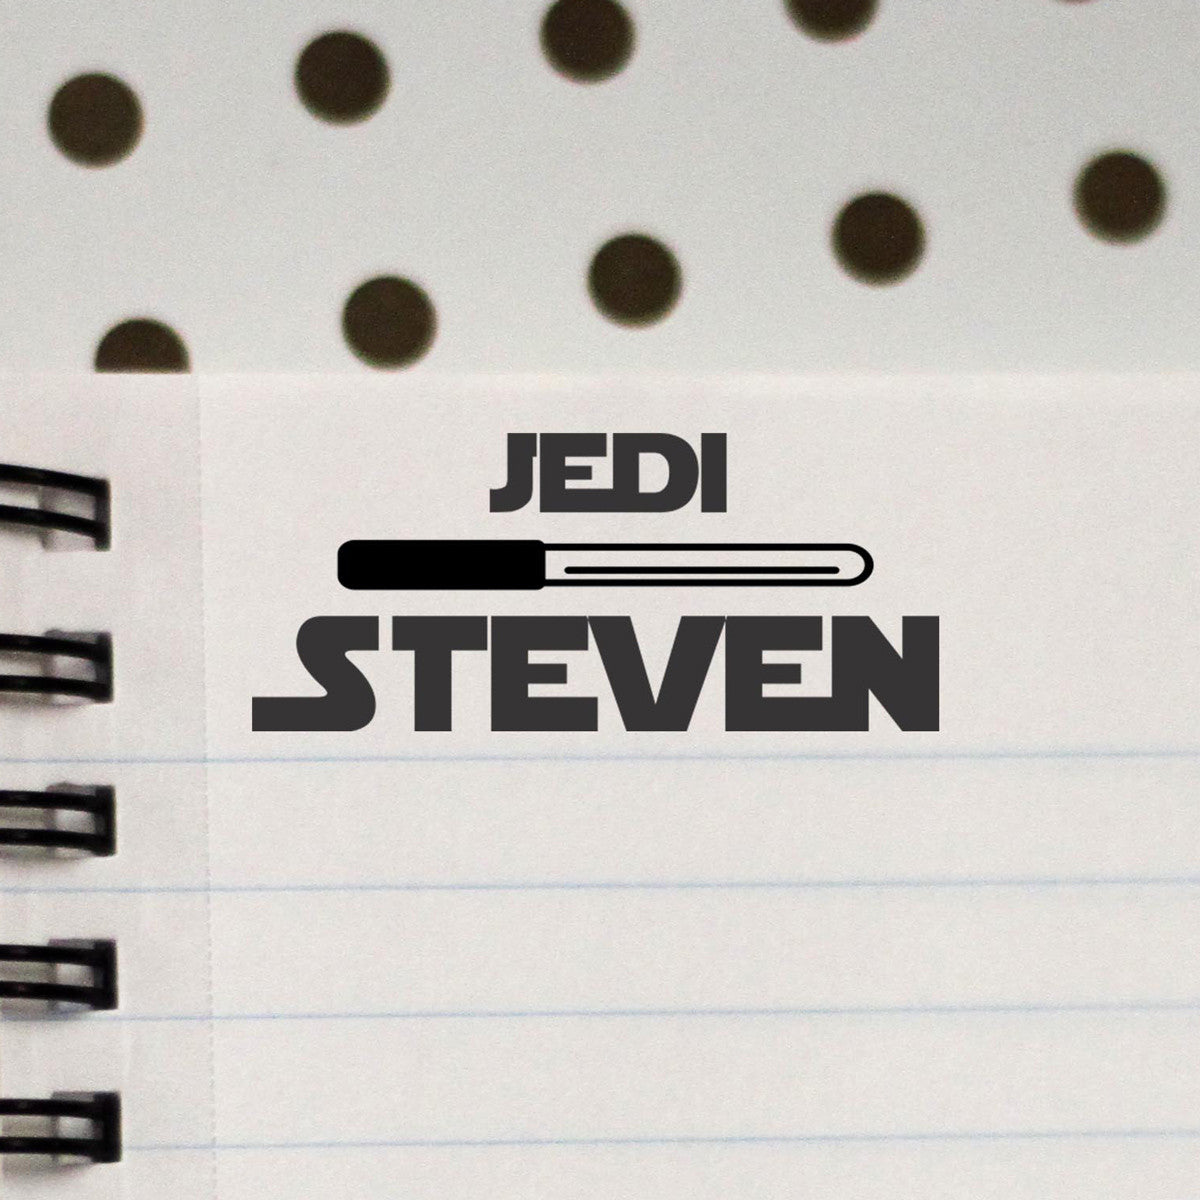 Personalized Kids Name Stamp - Jedi Steven – Stamp Out